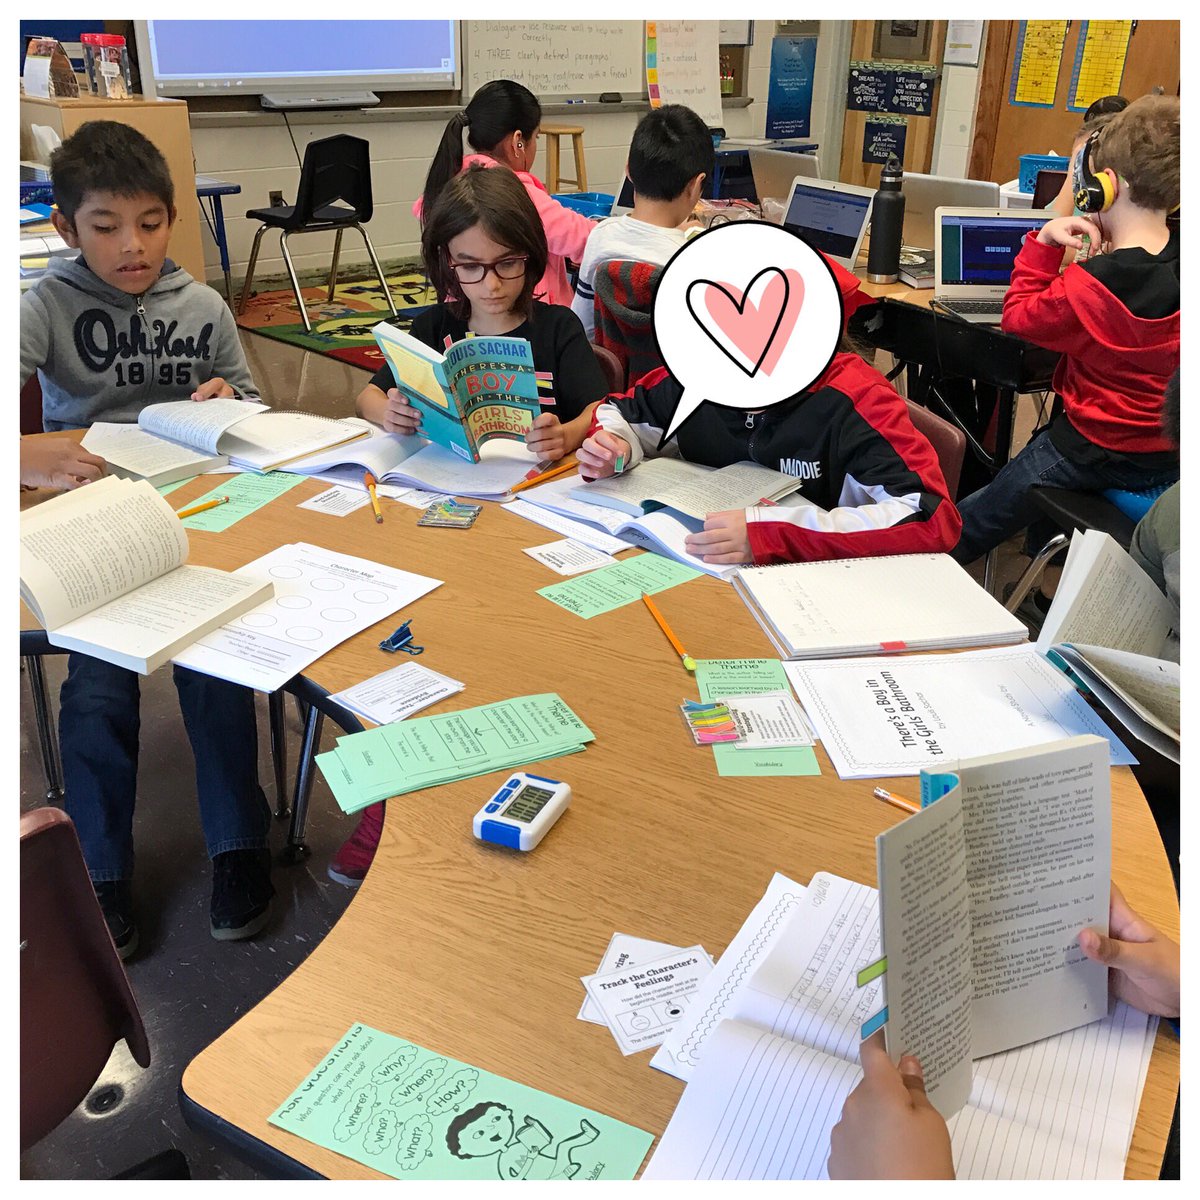 They couldn't wait to read their new guided reading selection by Louis Sachar! @LouisSachar #Readingengagement #KeyportSchools #guidedreading